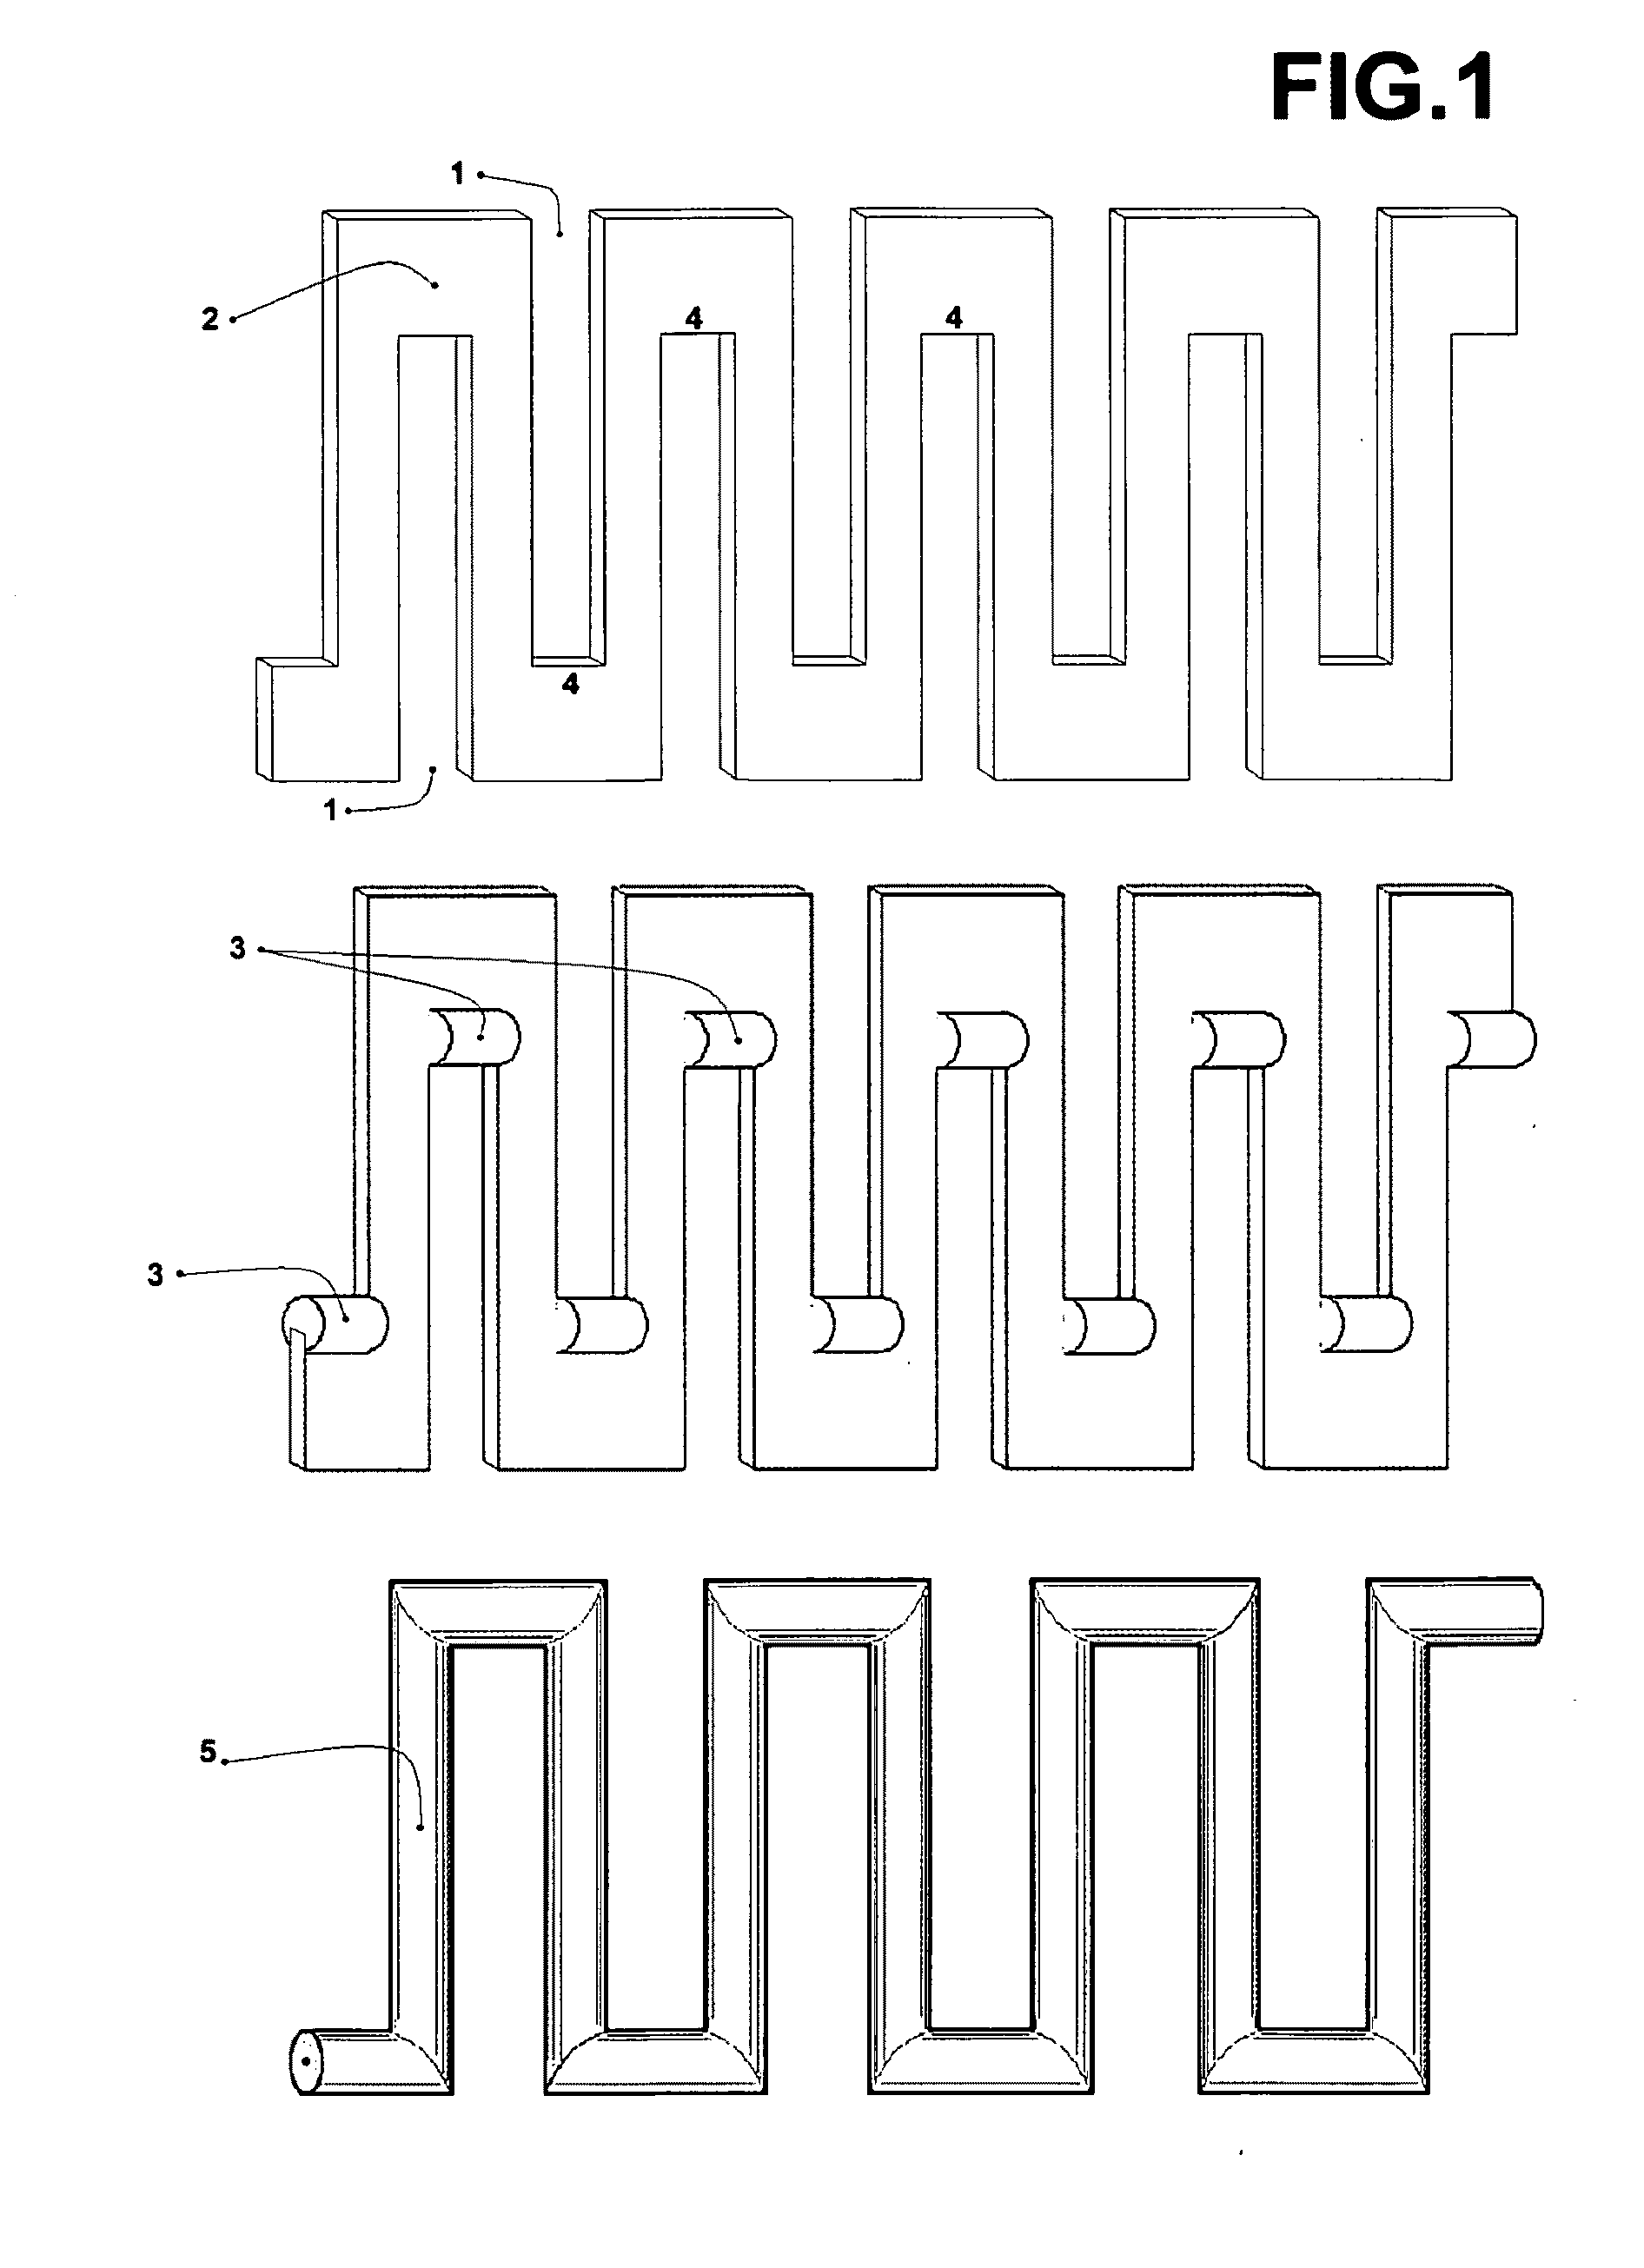 Multi-walled swing plate and swing beam